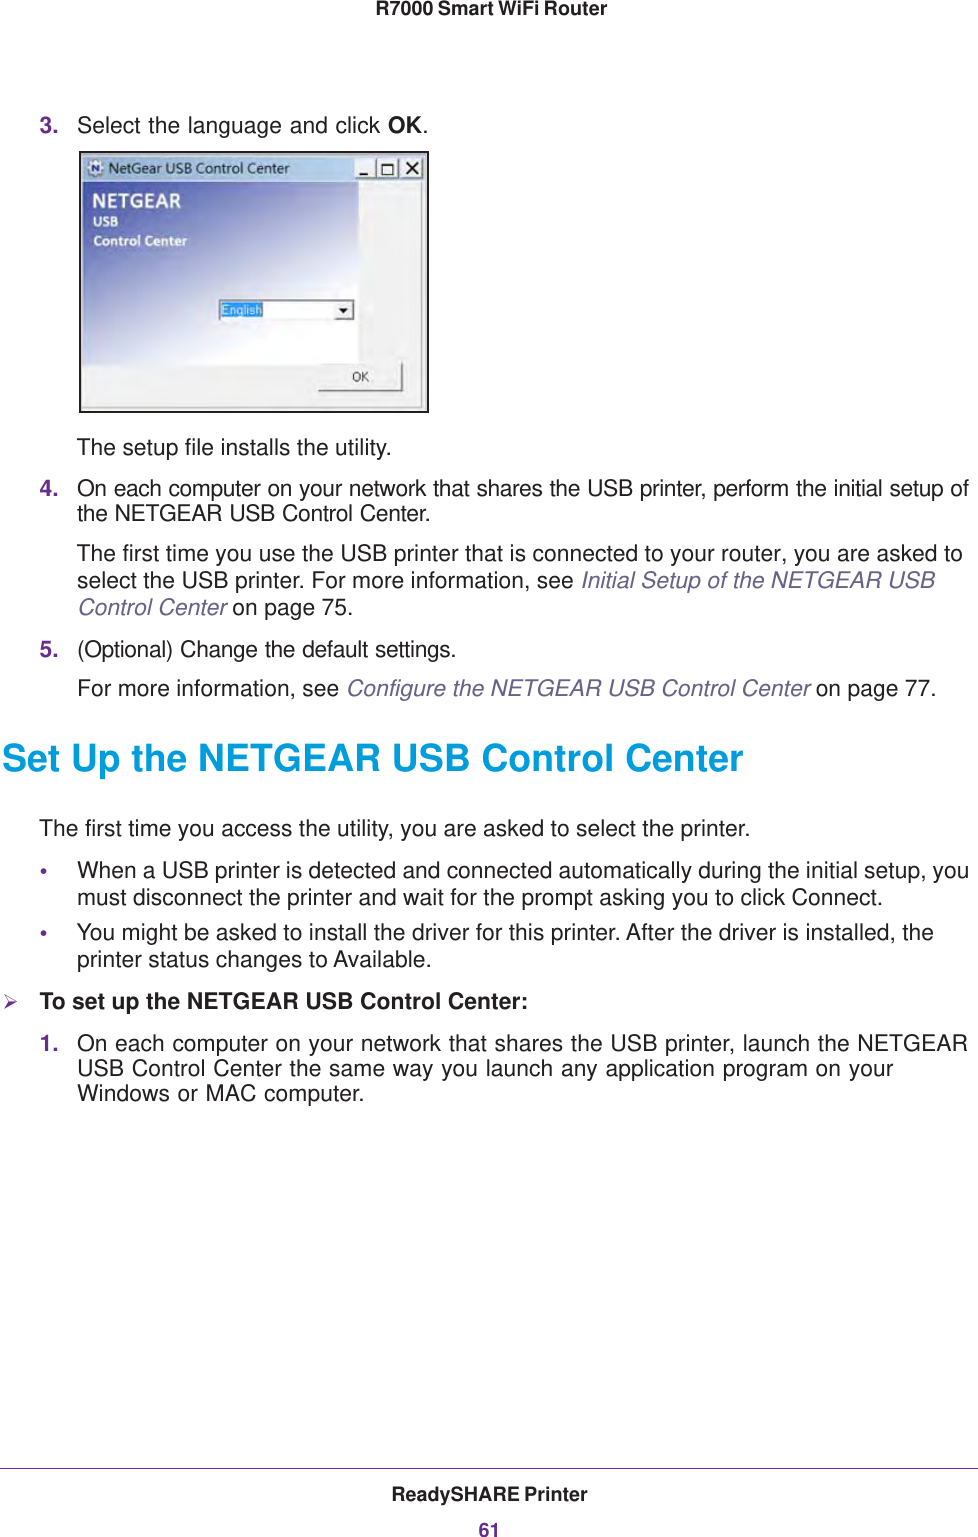 ReadySHARE Printer61 R7000 Smart WiFi Router3. Select the language and click OK.The setup file installs the utility.4. On each computer on your network that shares the USB printer, perform the initial setup of the NETGEAR USB Control Center.The first time you use the USB printer that is connected to your router, you are asked to select the USB printer. For more information, see Initial Setup of the NETGEAR USB Control Center on page 75.5. (Optional) Change the default settings.For more information, see Configure the NETGEAR USB Control Center on page 77.Set Up the NETGEAR USB Control CenterThe first time you access the utility, you are asked to select the printer.•When a USB printer is detected and connected automatically during the initial setup, you must disconnect the printer and wait for the prompt asking you to click Connect.•You might be asked to install the driver for this printer. After the driver is installed, the printer status changes to Available.To set up the NETGEAR USB Control Center:1. On each computer on your network that shares the USB printer, launch the NETGEAR USB Control Center the same way you launch any application program on your Windows or MAC computer.